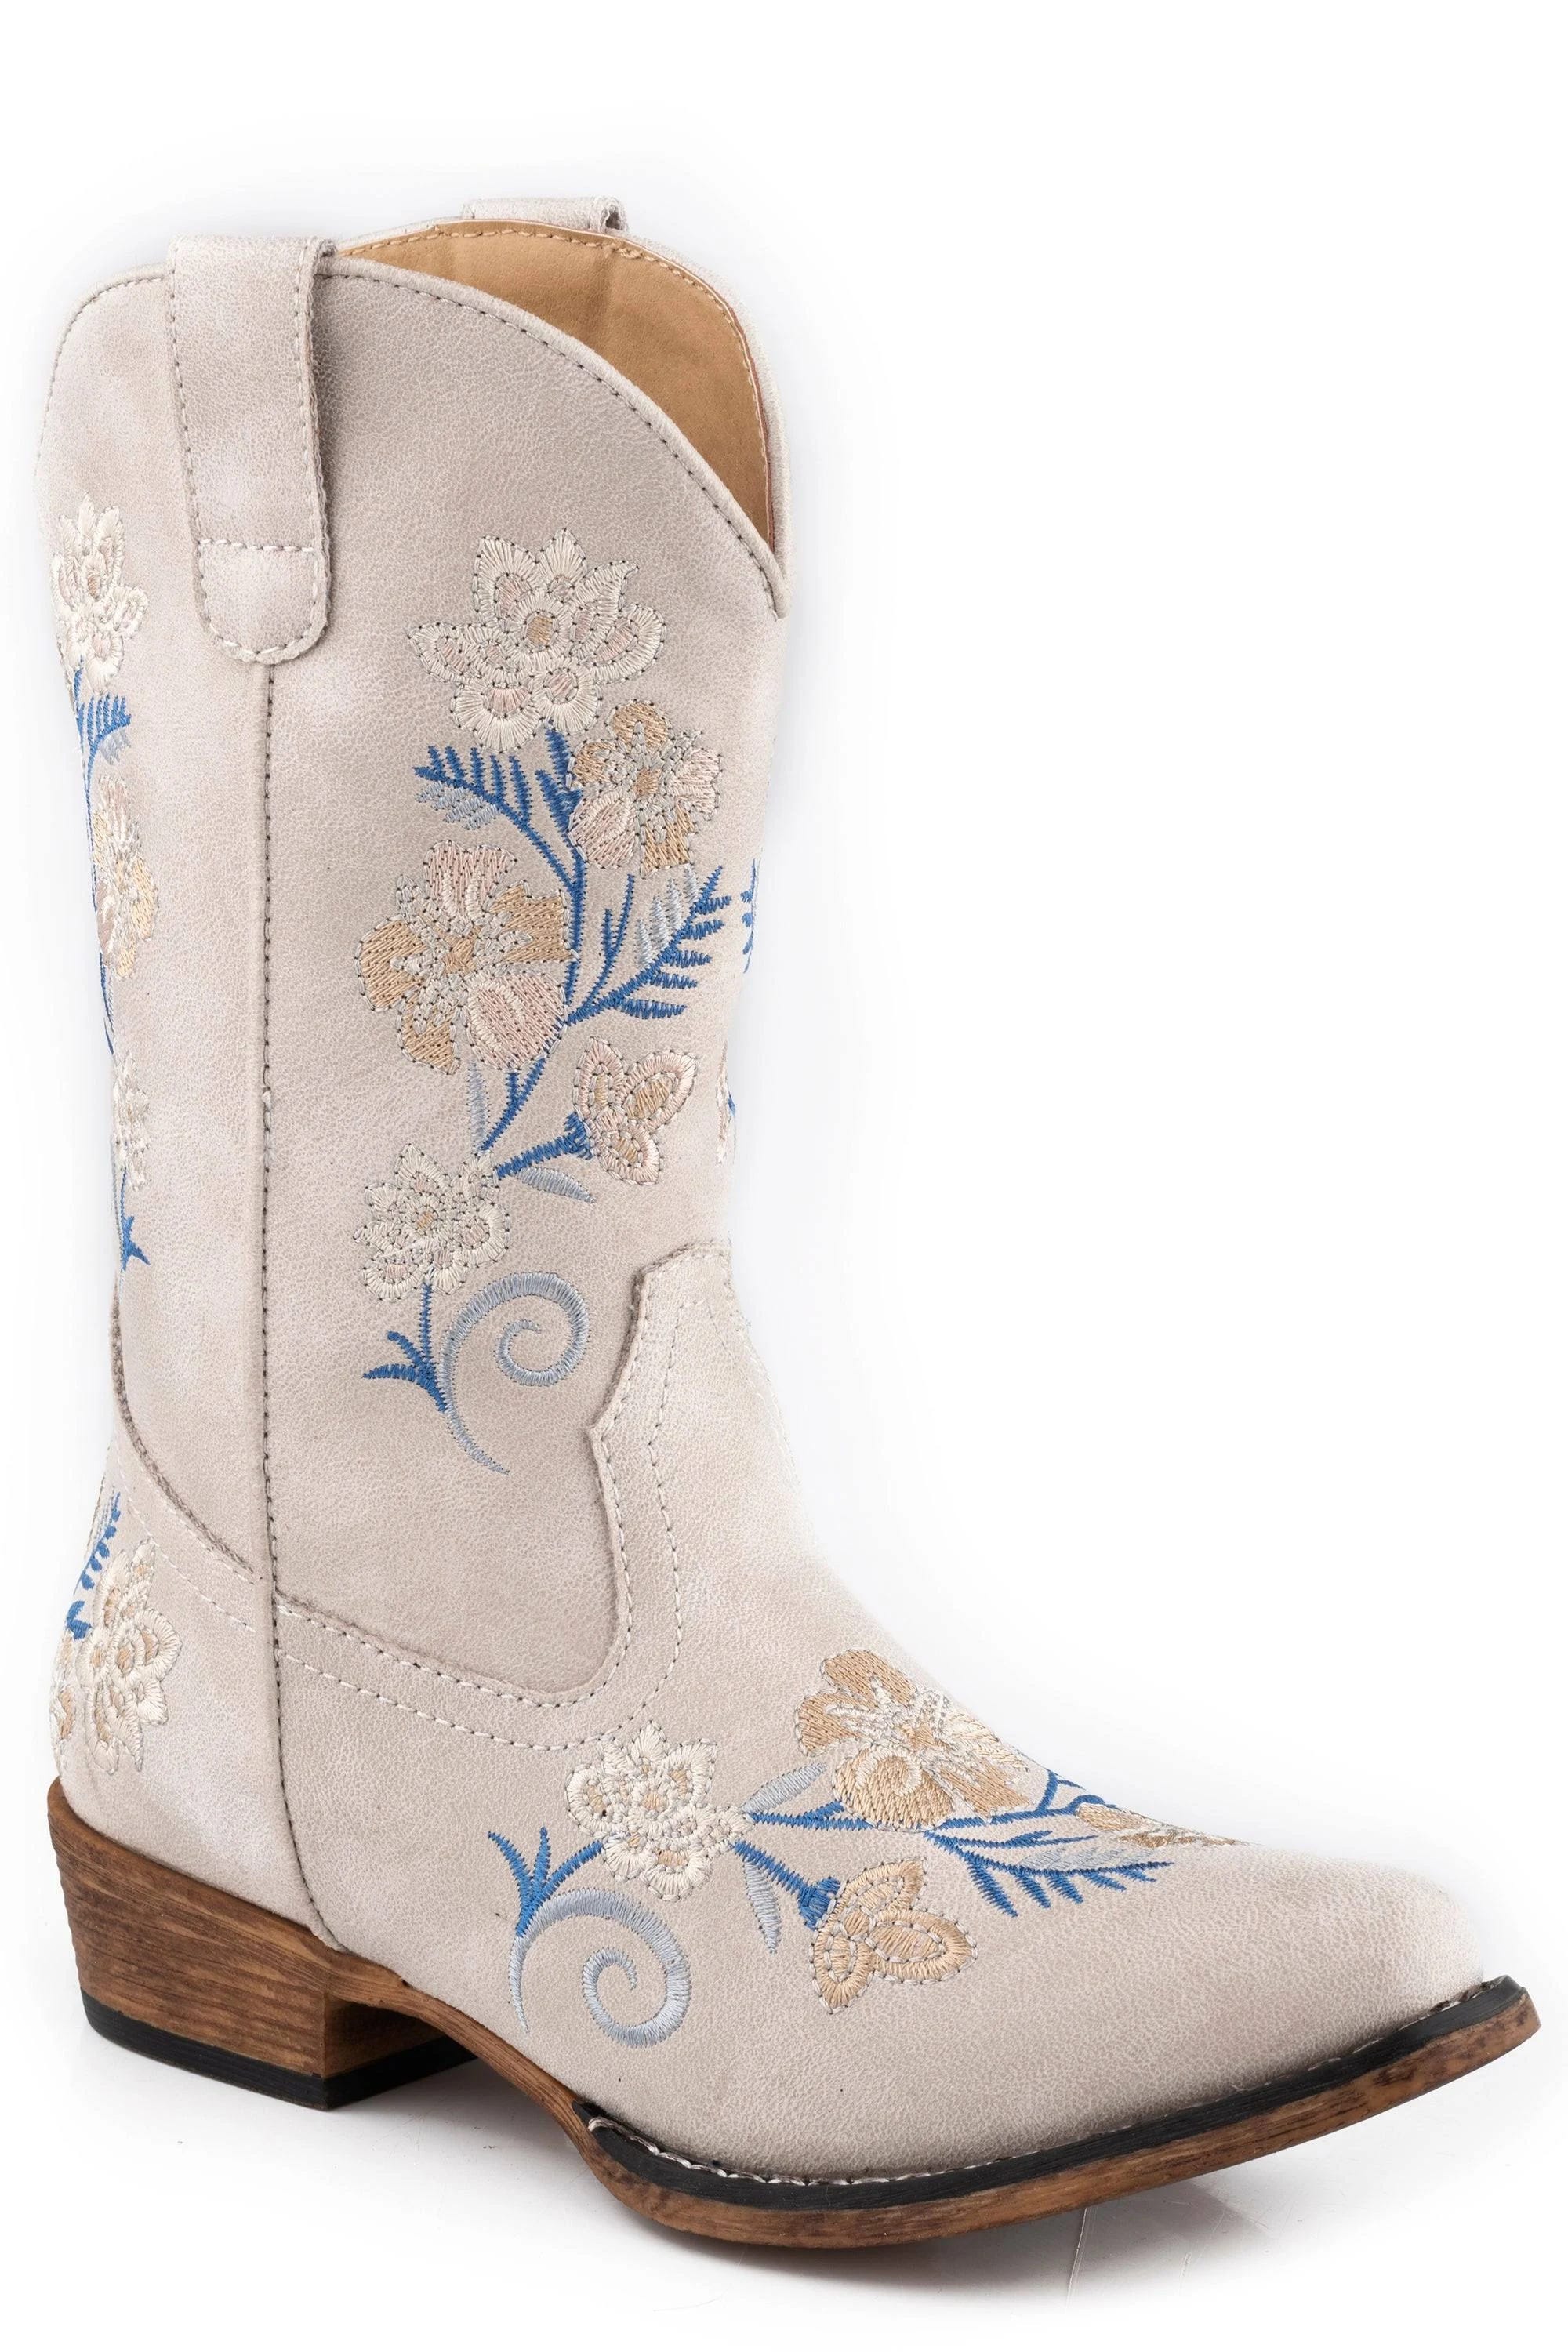 Stylish Western Flower Embroidered Cowboy Boots for Girls | Image